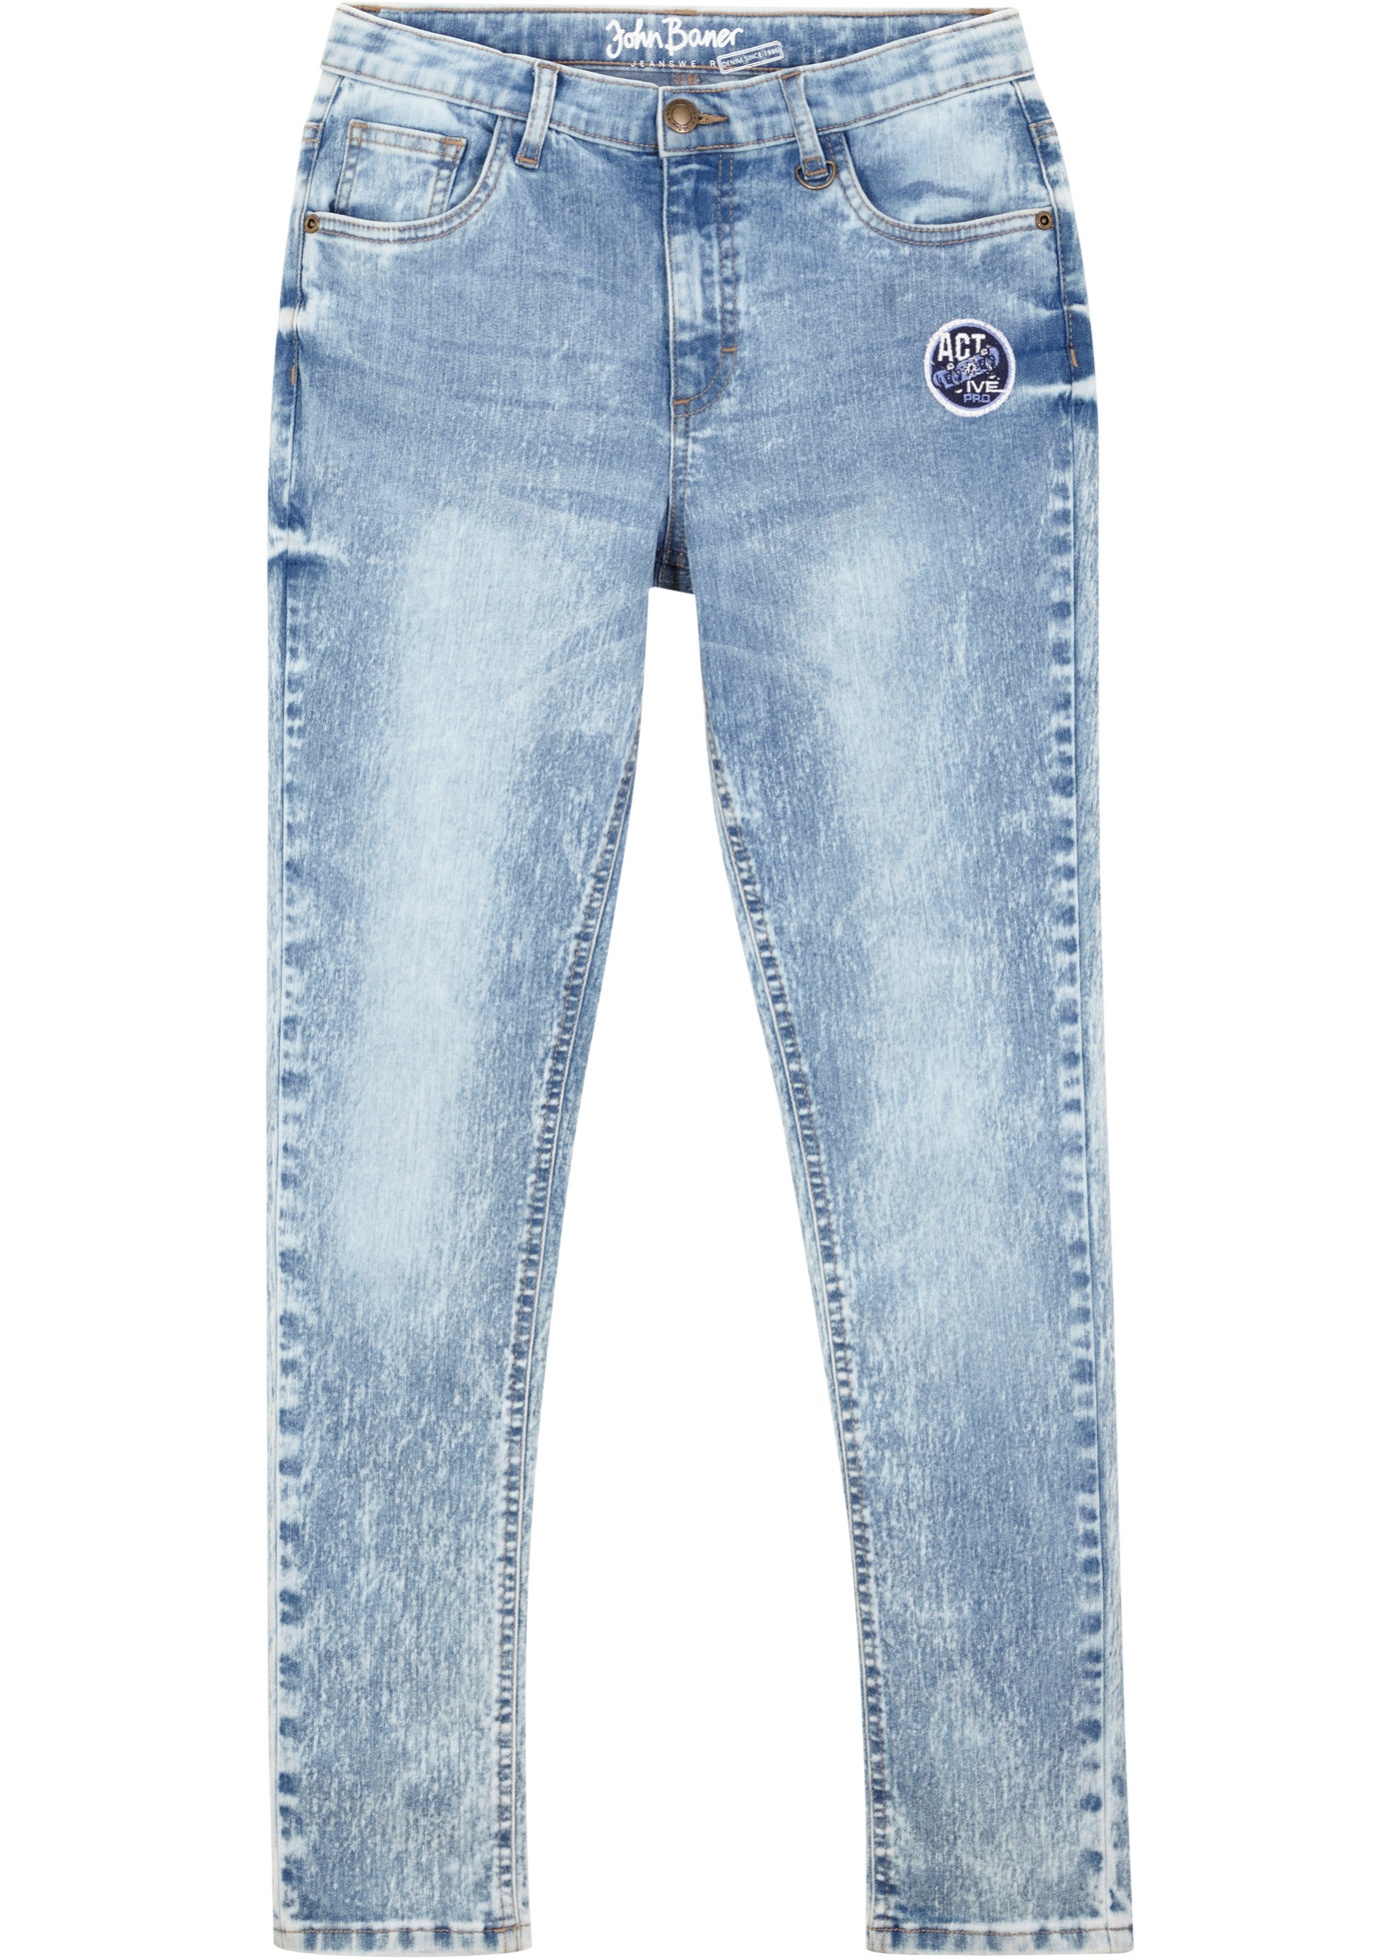 Jungen Jeans mit cloudy Waschung, Skinny Fit